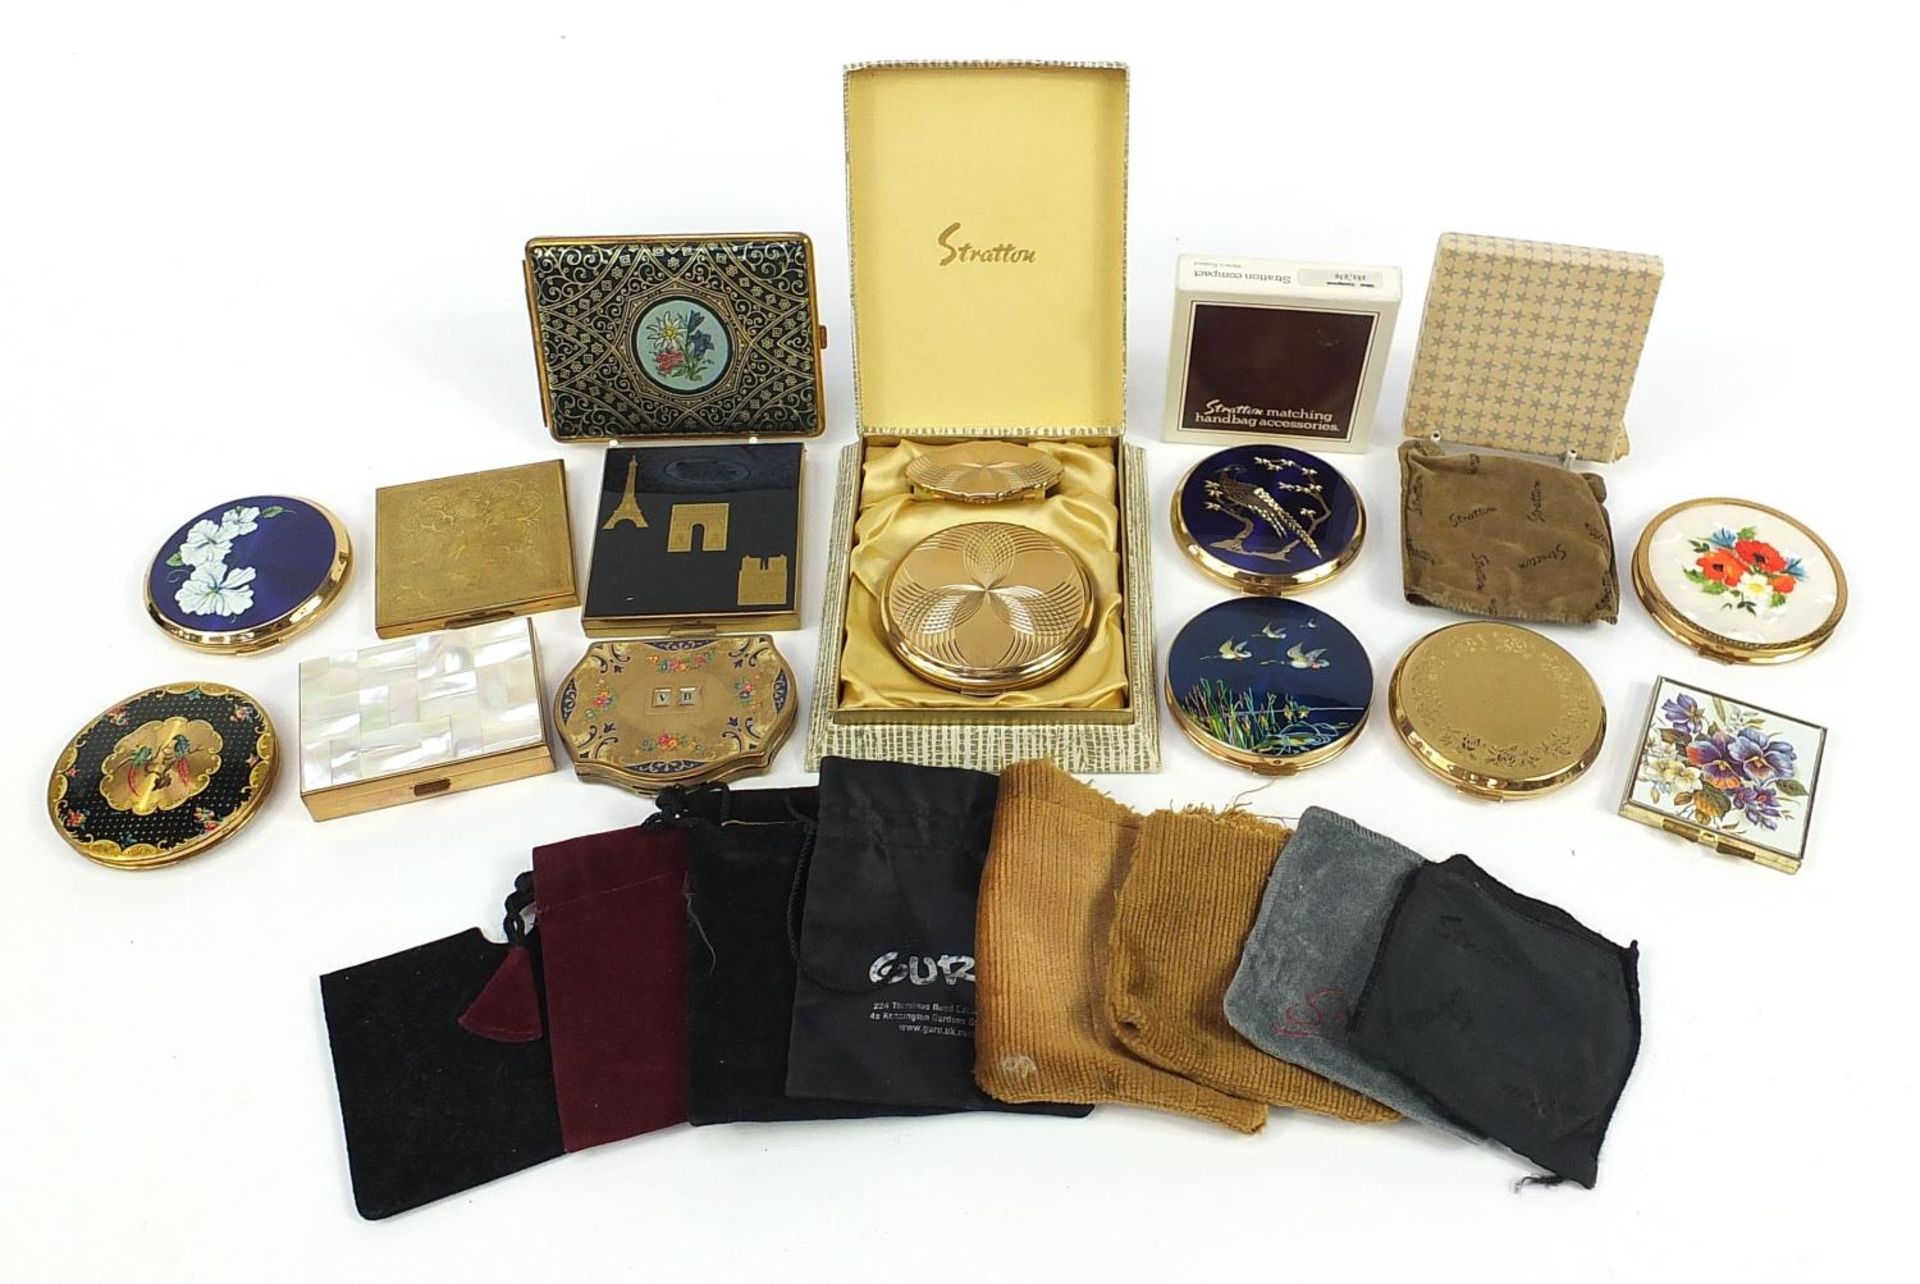 Twelve vintage ladies powder compacts and a tooled leather cigarette case, some enamelled